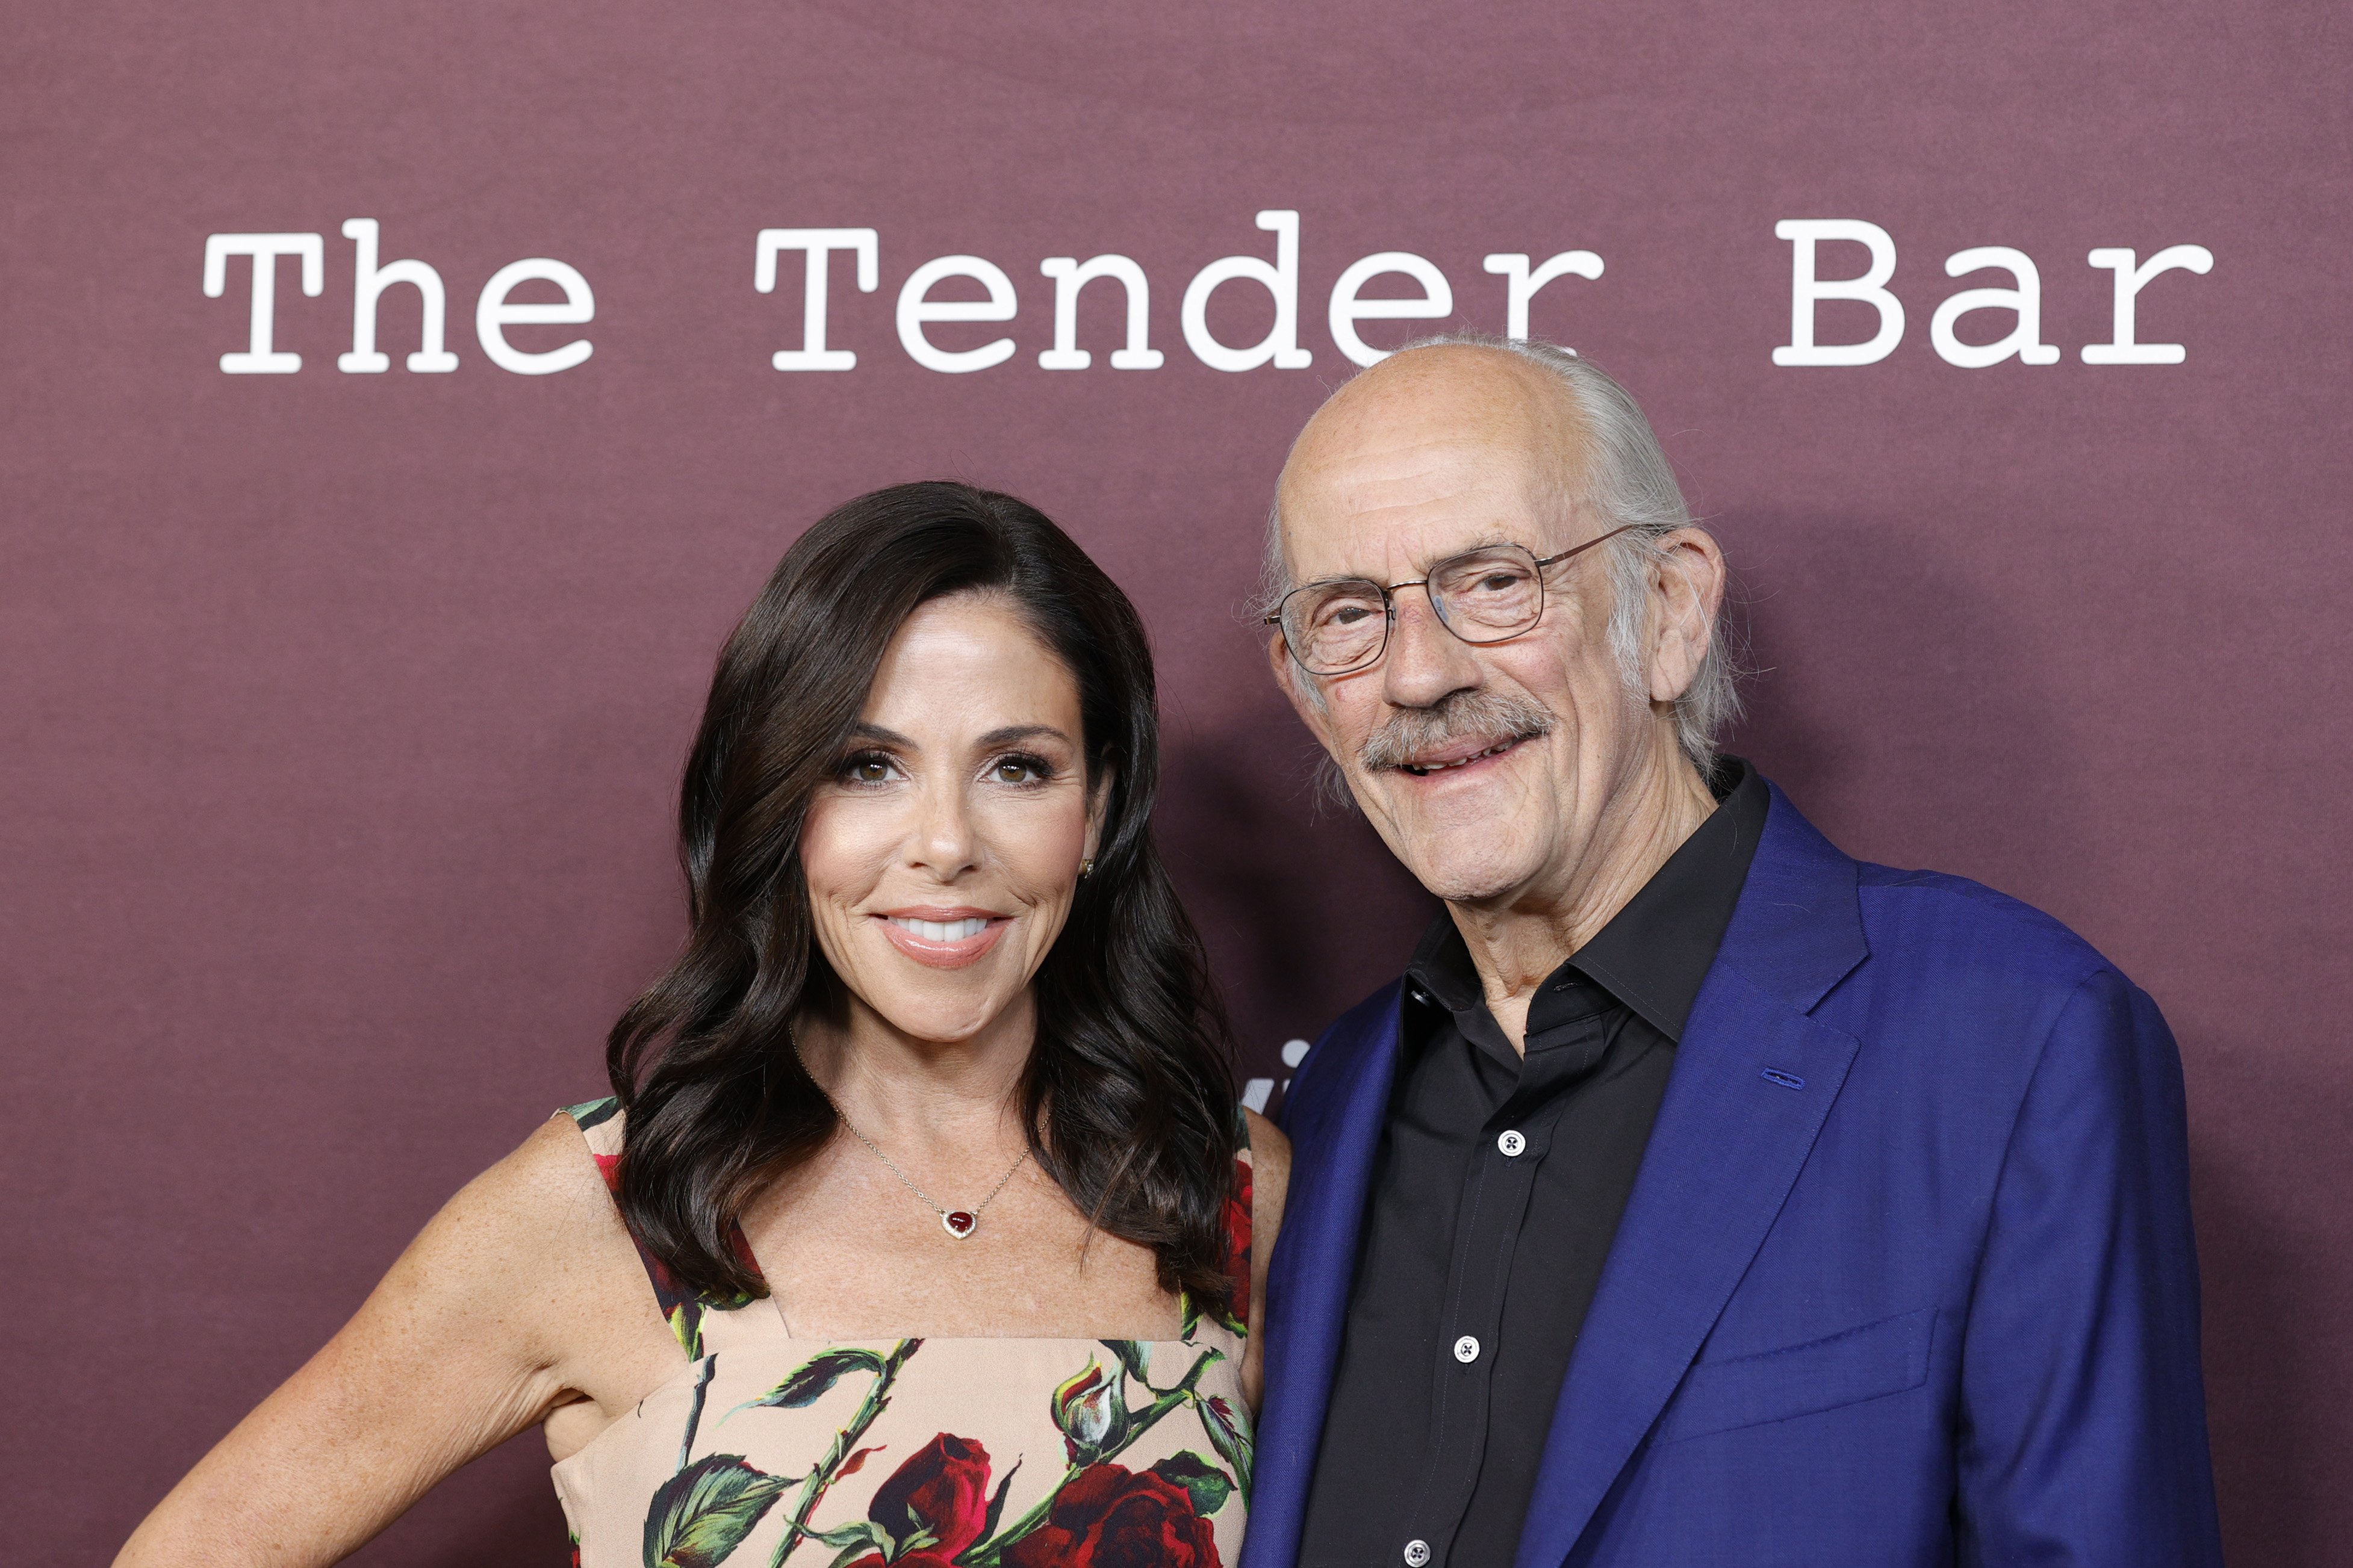 Lisa Lloyd and Christopher Lloyd at "The Tender Bar" premiere at DGA Theater Complex, Los Angeles, CA, on October 3, 2021. | Source: Getty Images